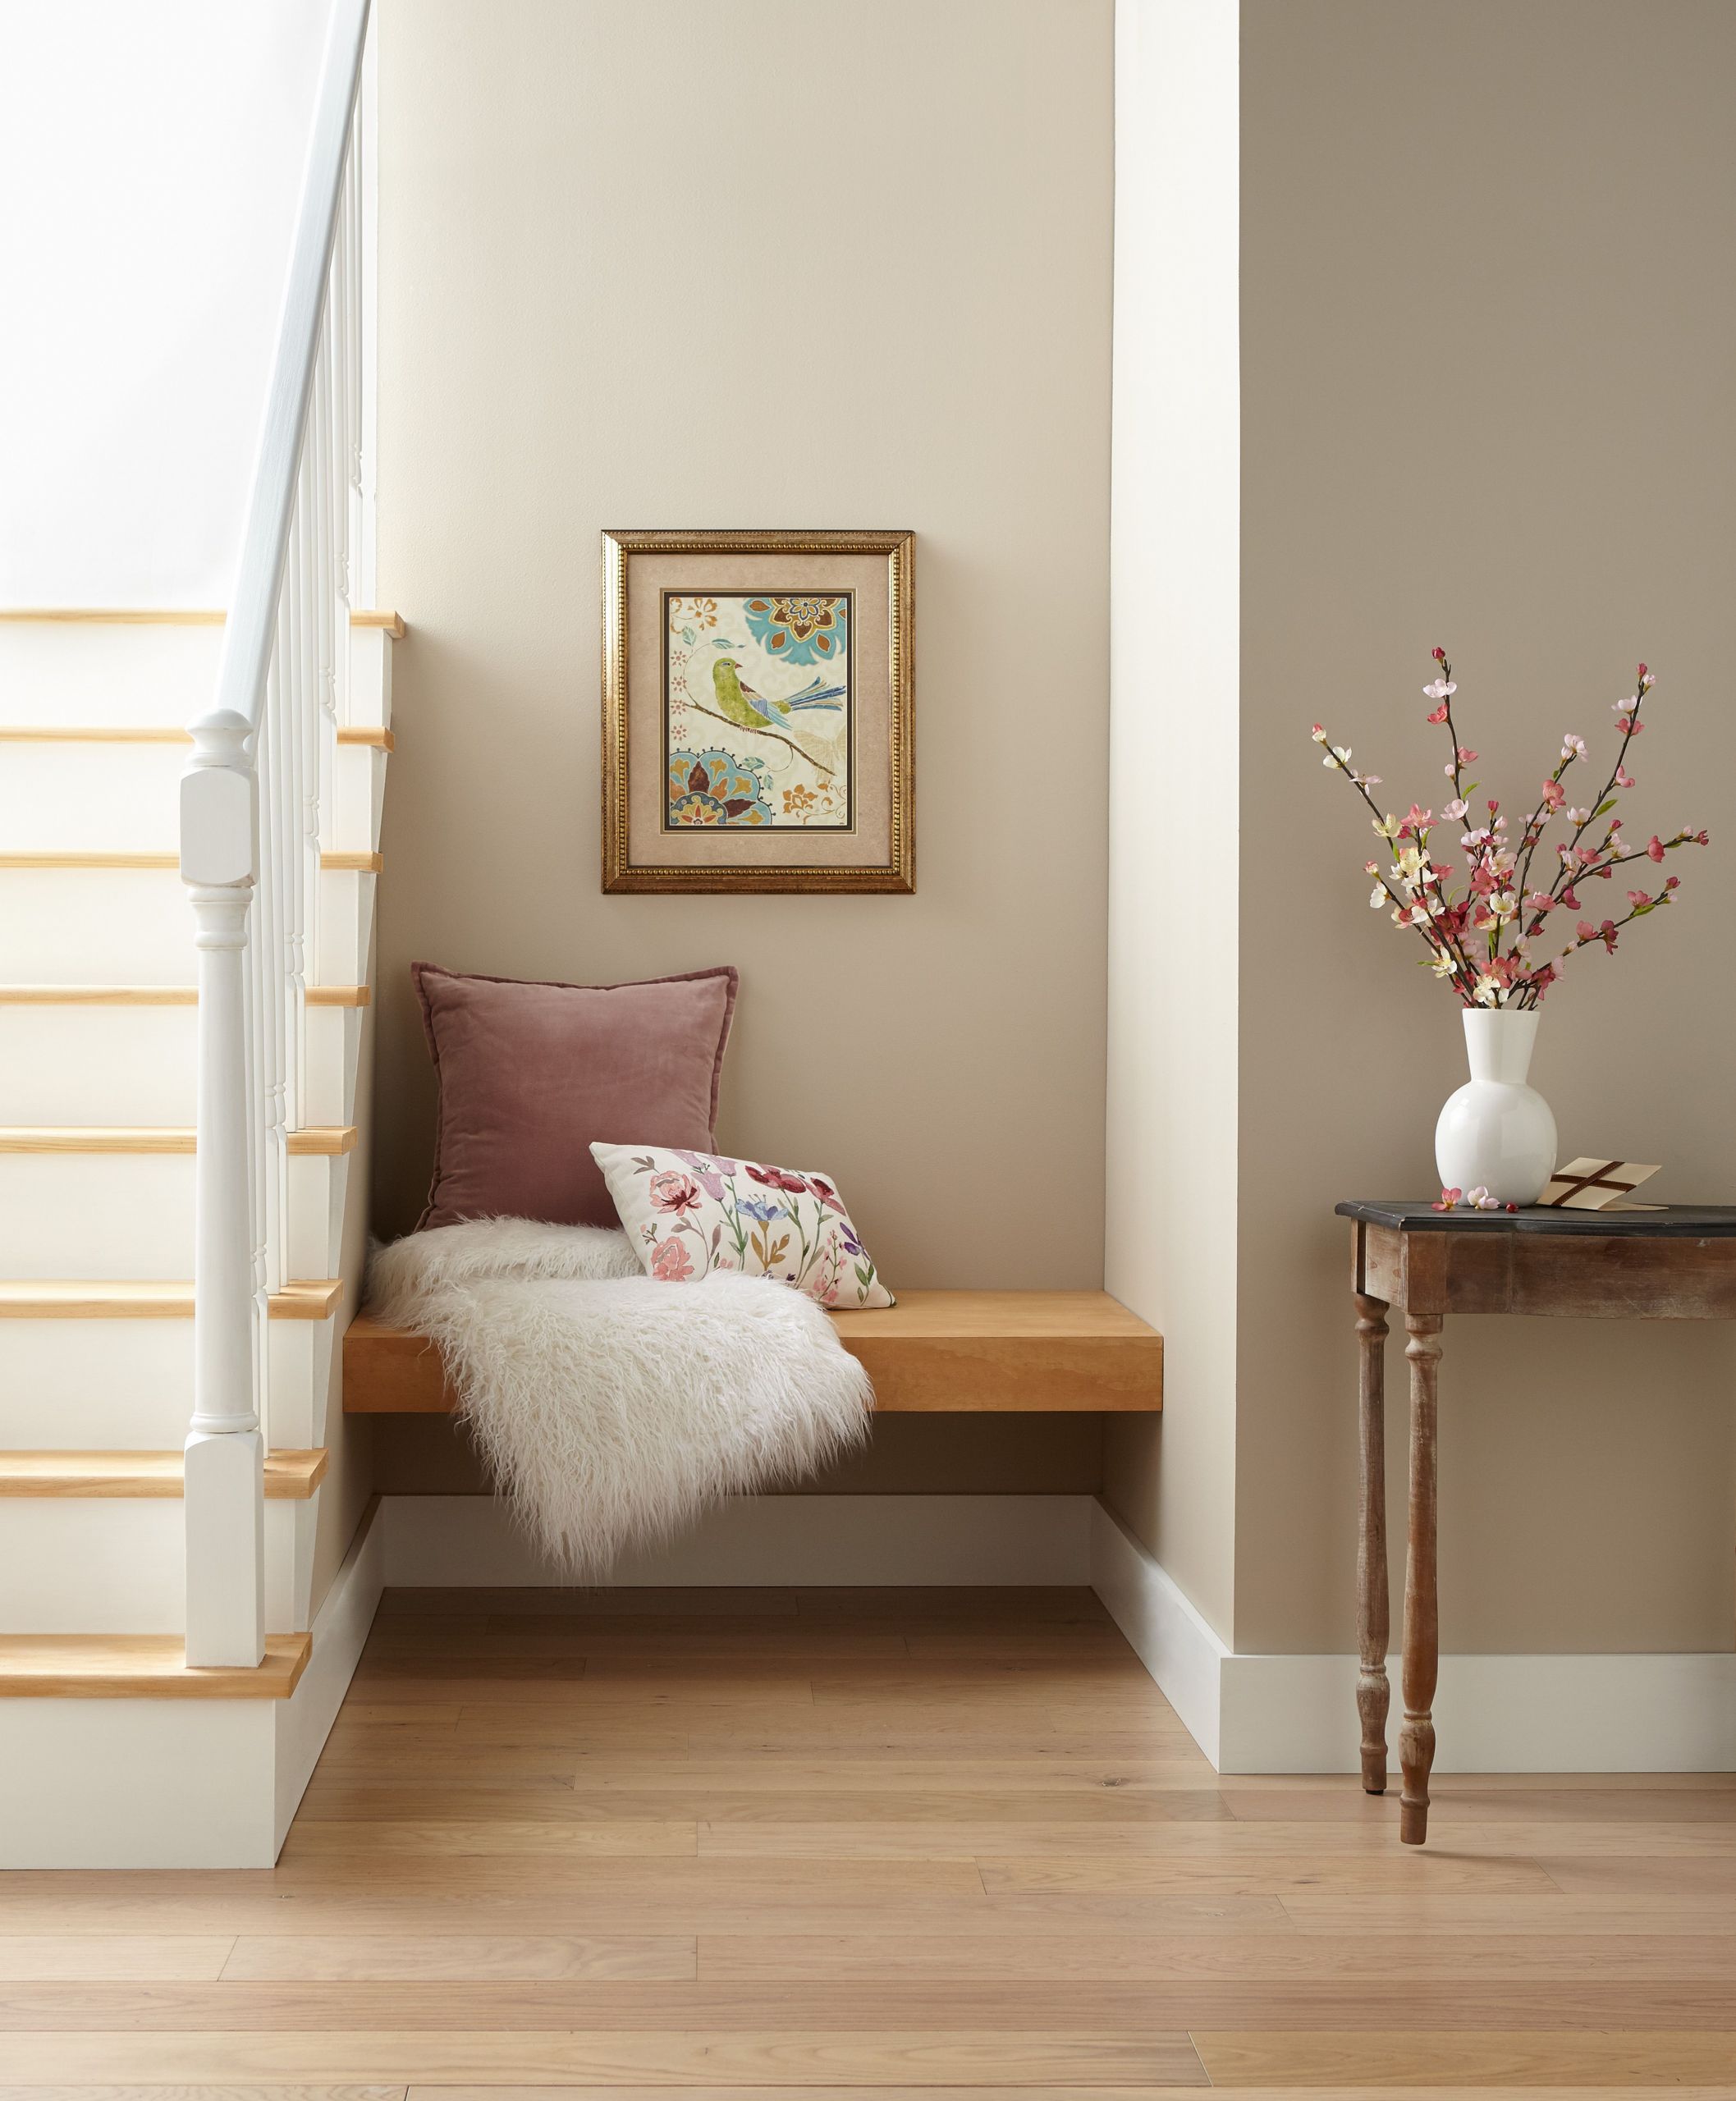 Popular Living Room Colors 2020
 These Are the Paint Color Trends for 2020 According to Behr